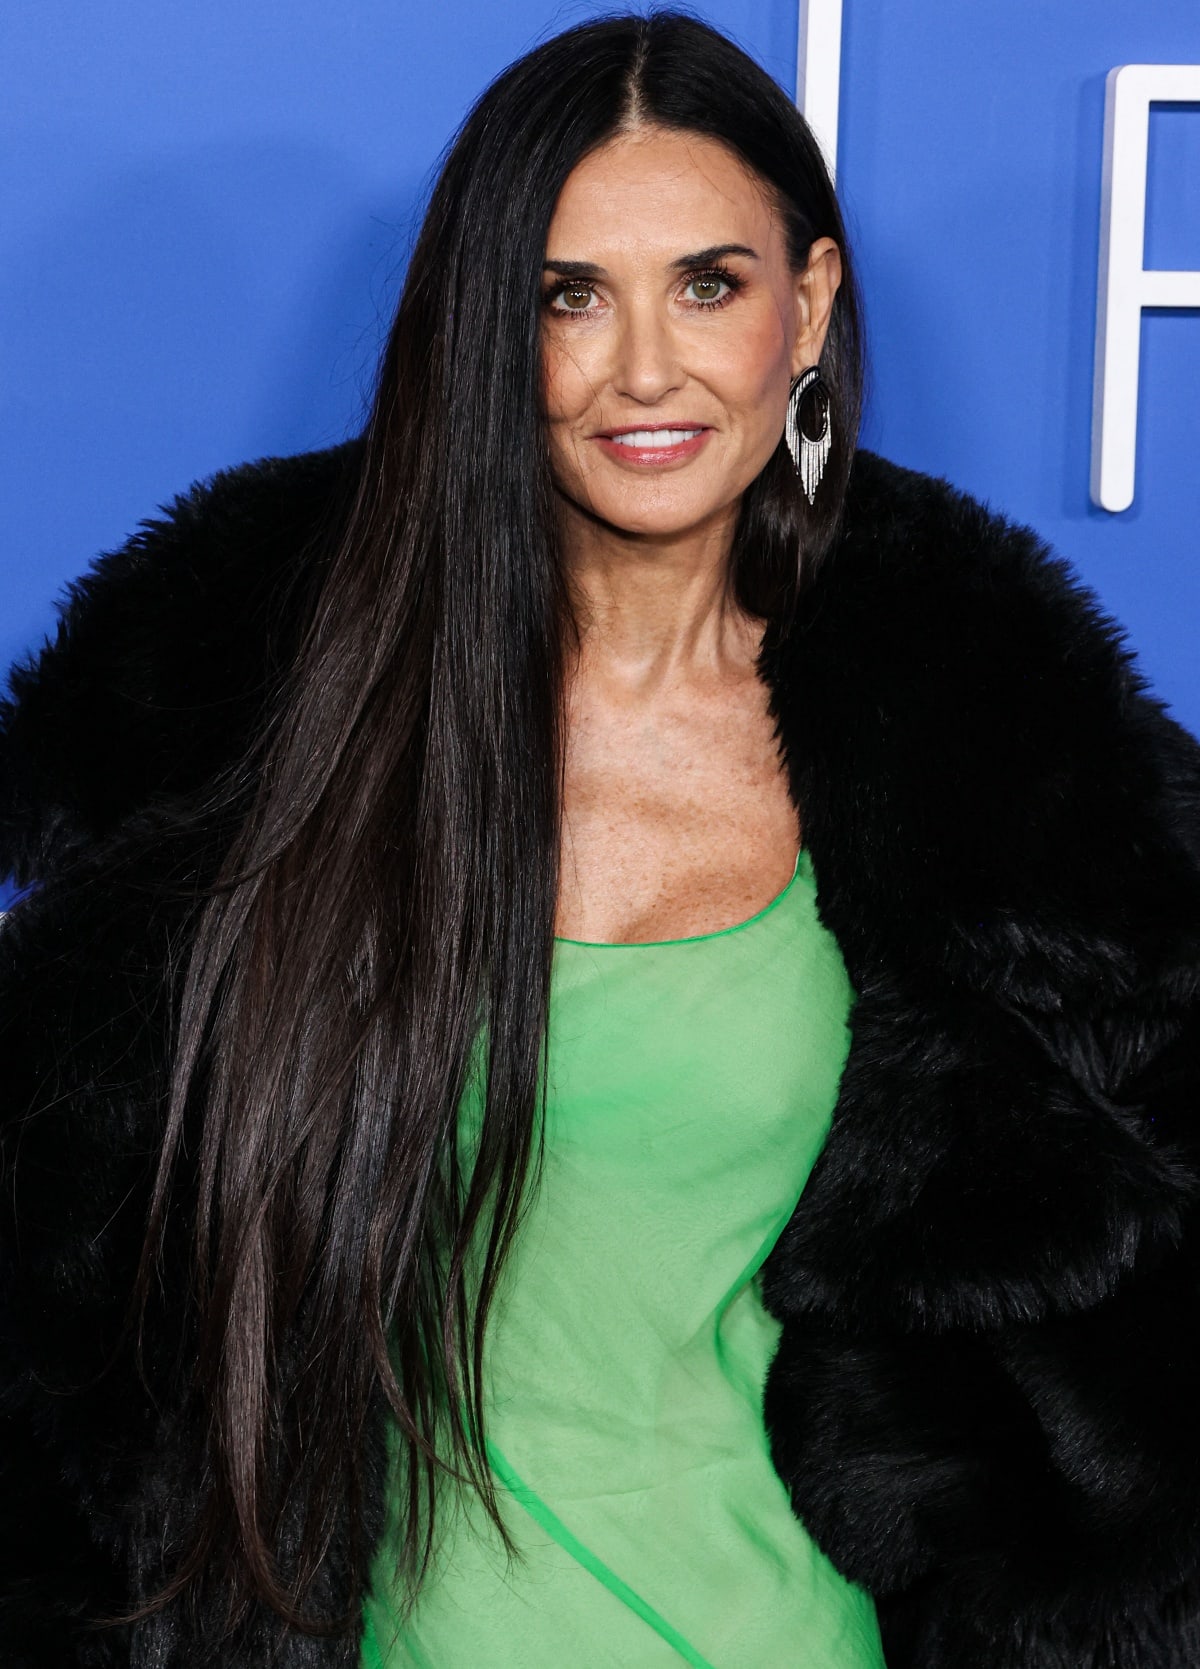 Demi Moore’s beauty look was understated, with rose-tinted lips and her signature long straight hair cascading down her back